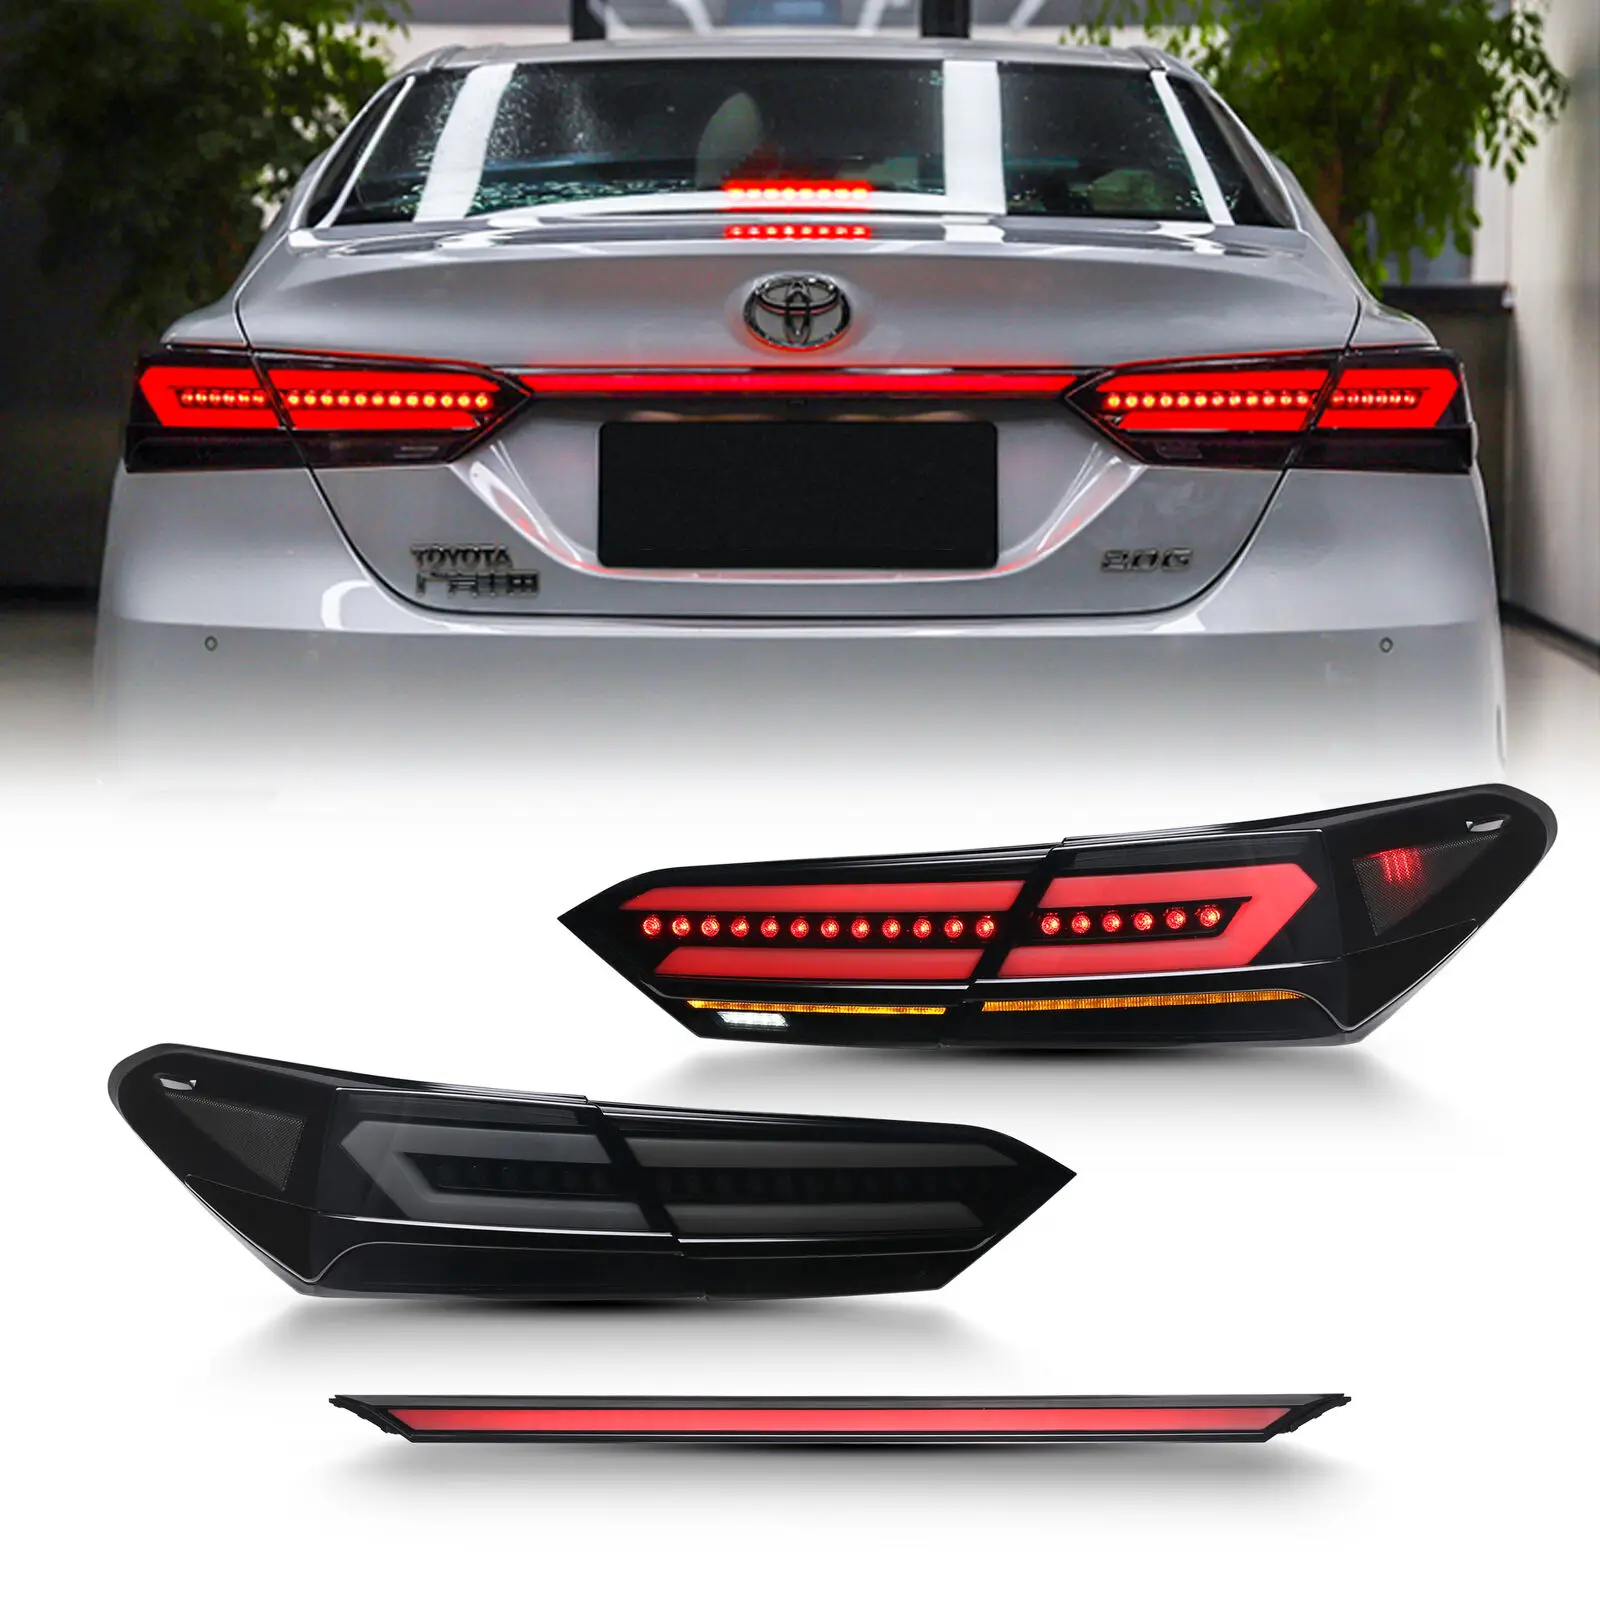 

LED Tail Lights With Trunk Lamp For Toyota Camry 2018 2019 2020 2021 2022 2023 8Th GEN SE LE TRD Smoked Rear Lamps Animation DRL